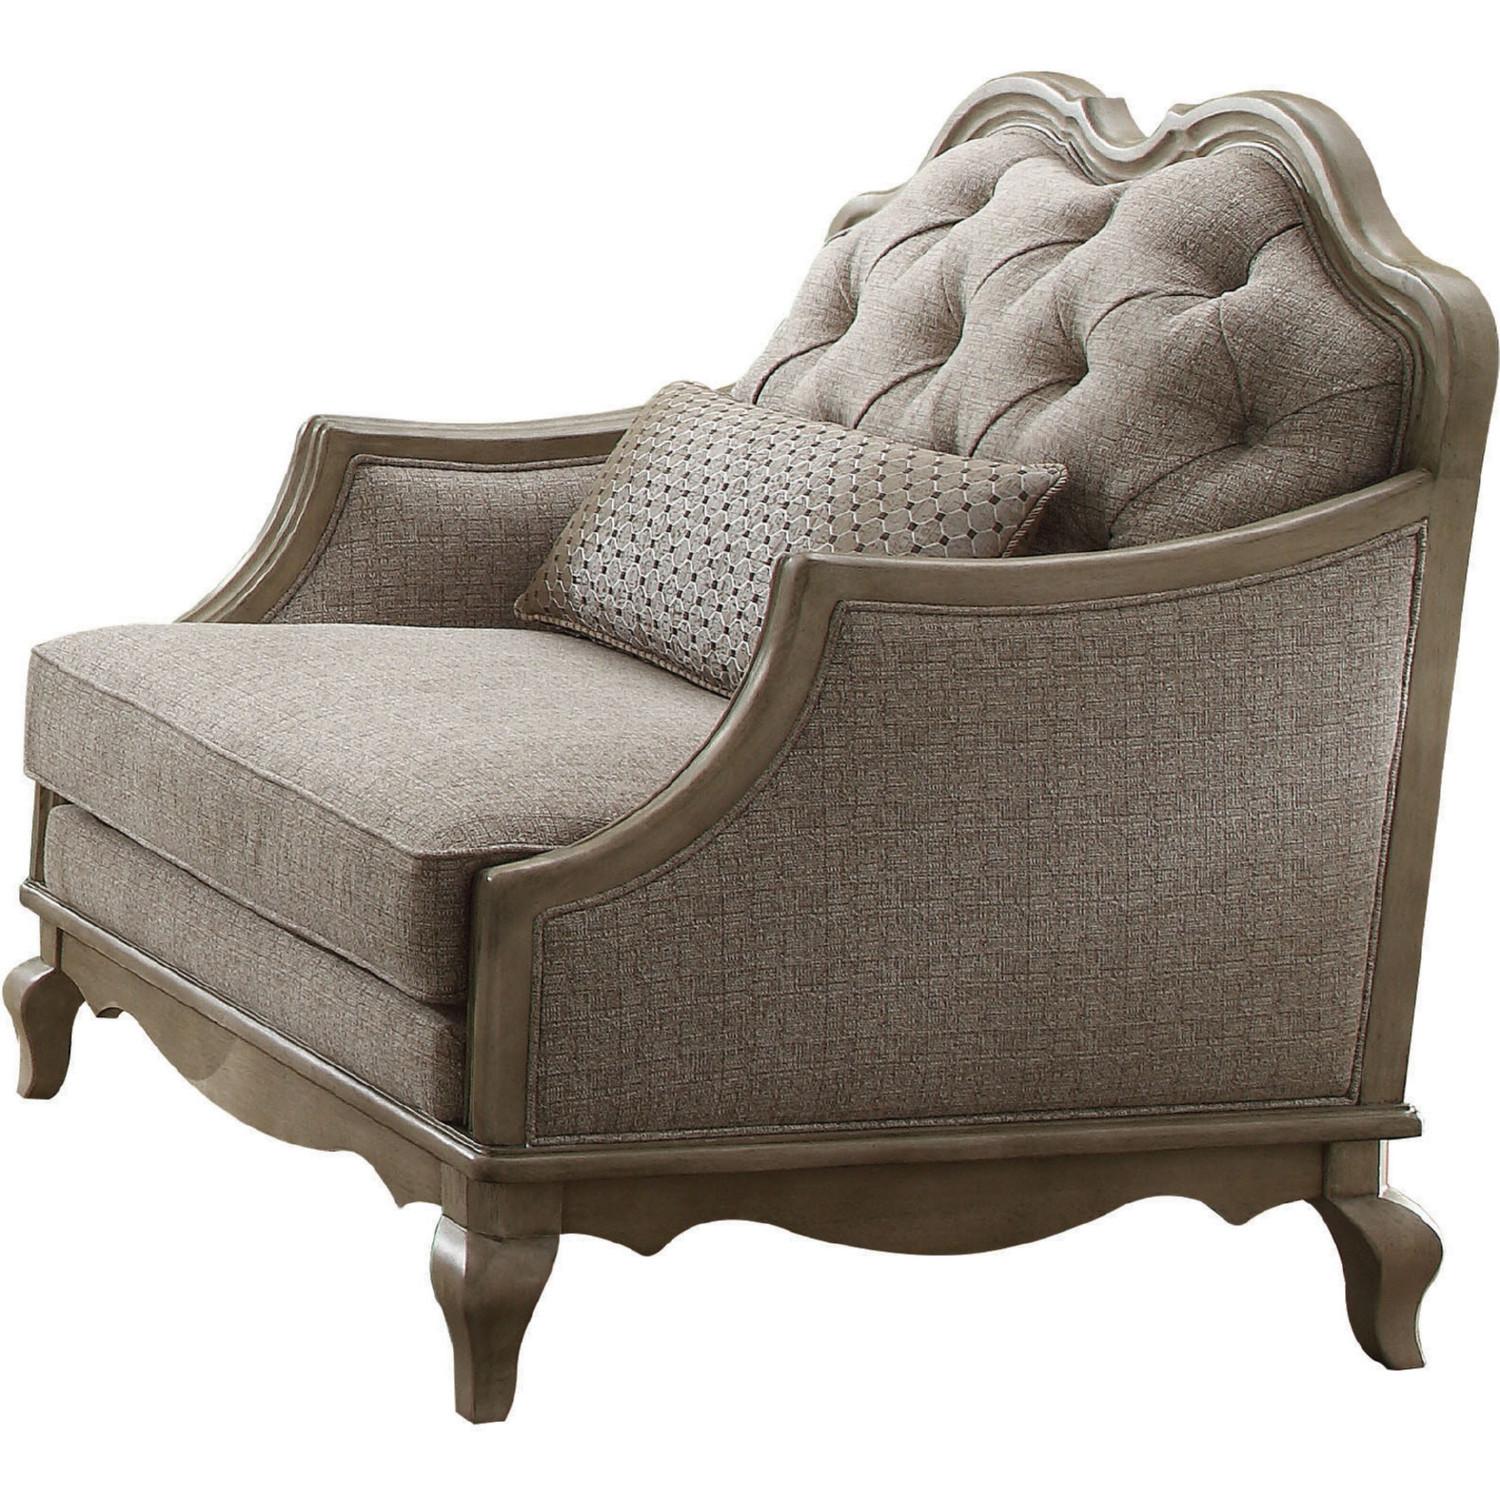 Classic, Traditional Arm Chairs Chelmsford-56052 Chelmsford-56052 in Taupe, Beige Fabric